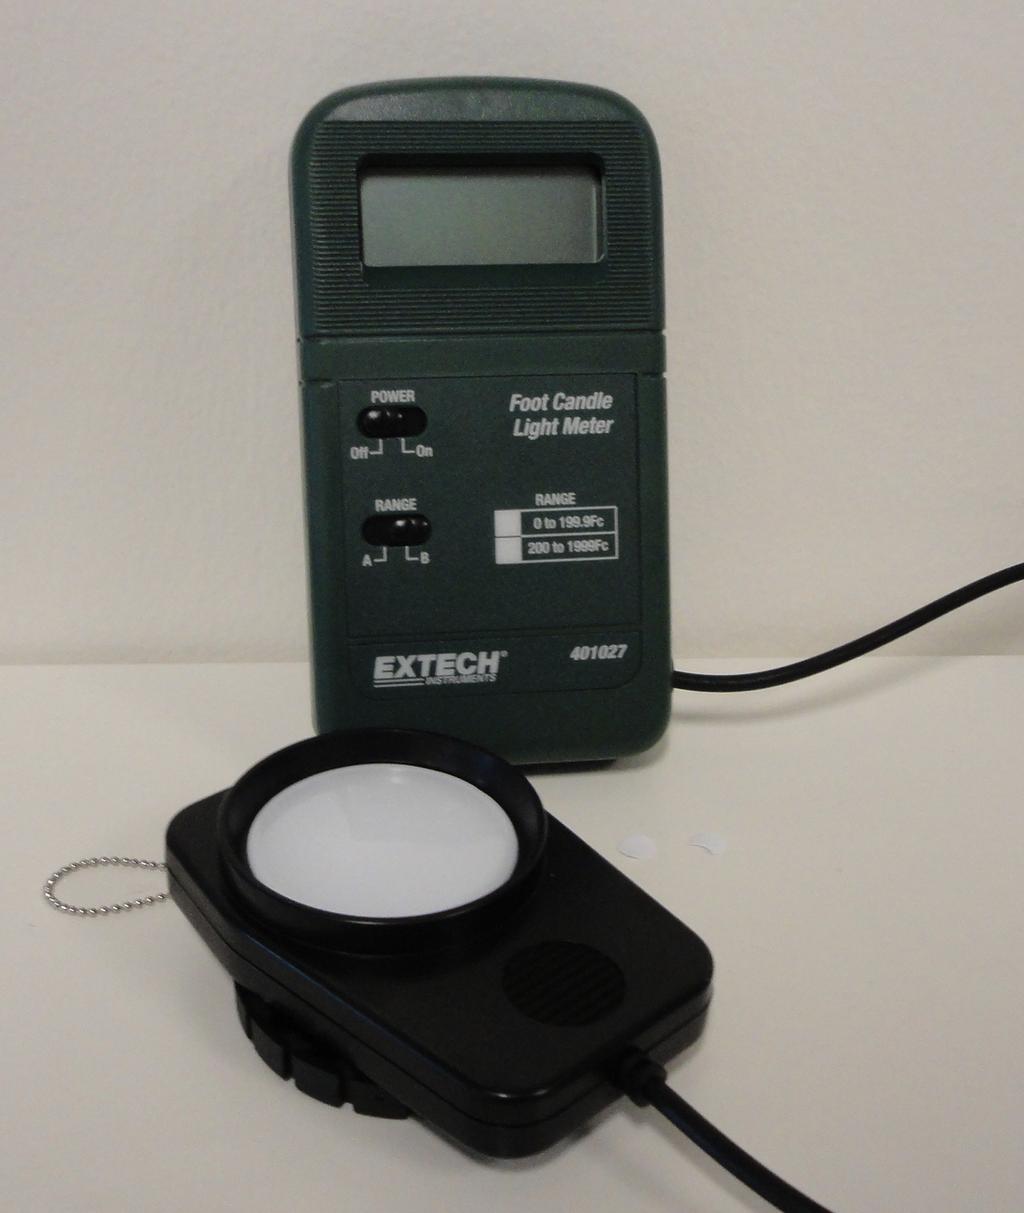 What You Can Do with a Light Meter Measure light levels at different distances from a source to determine appropriate light levels.